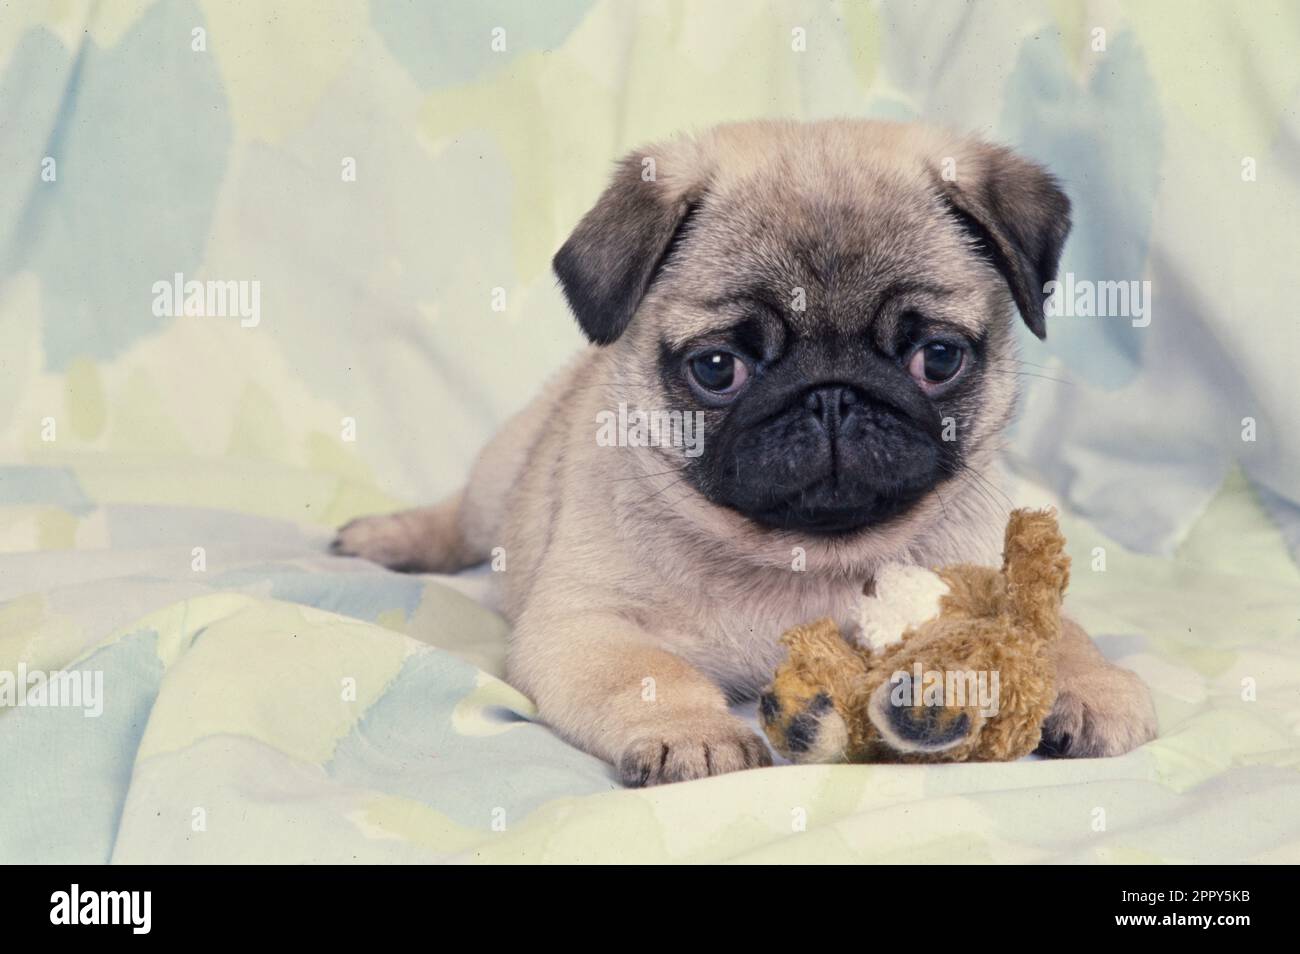 Pug puppy laying on light green background with stuffed toy near front paws Stock Photo